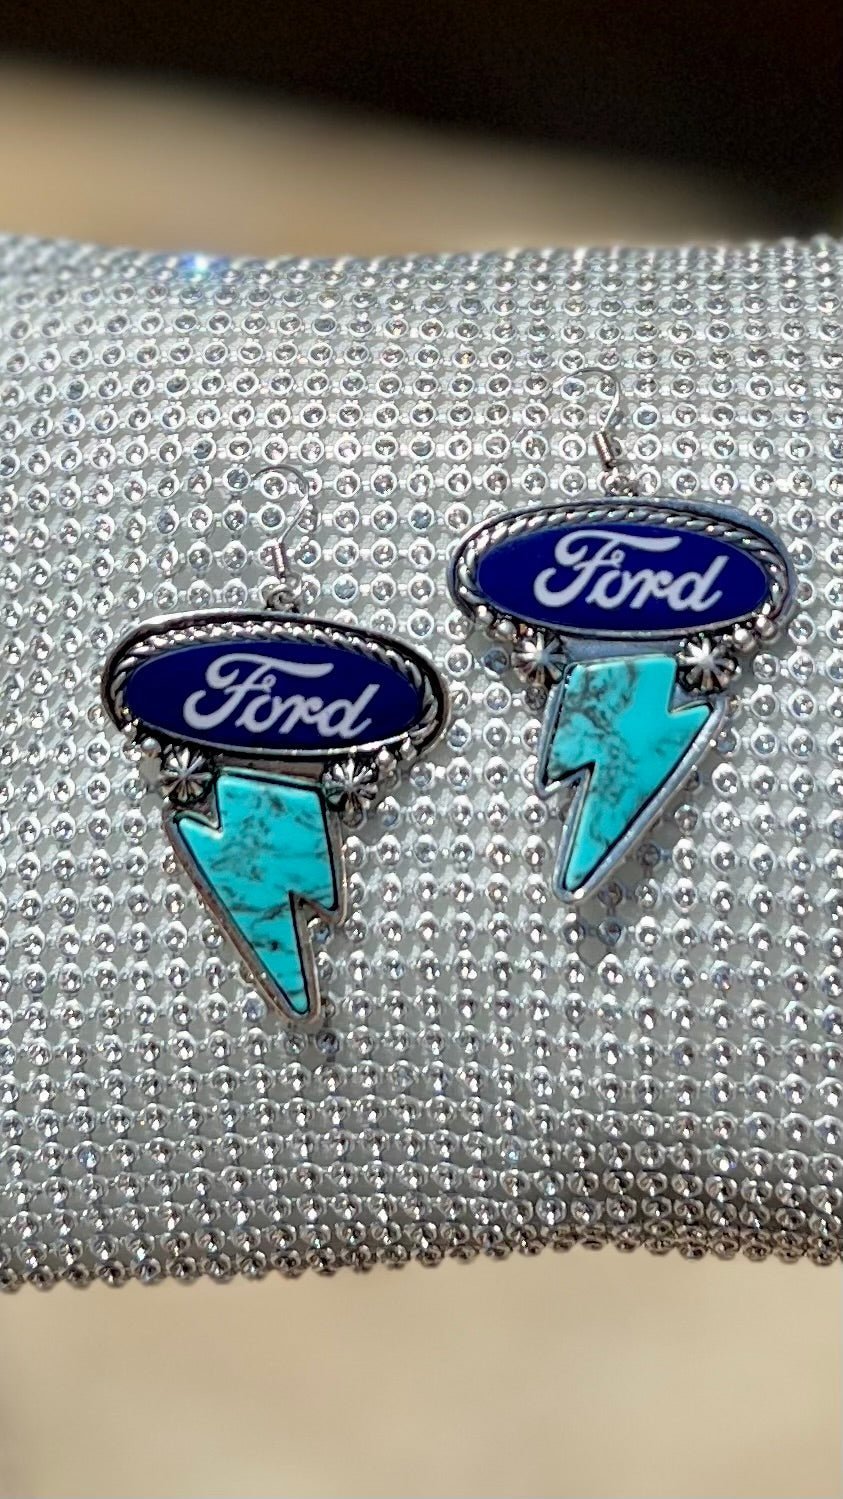 Express your love of classic American brands with these Ford Earrings! Featuring a western-style concho in a high-polish silver finish, plus a thunderbolt and Ford logo for the perfect combination of style and spirit. Hang 'em up with the cable-textured fish hook and show off that unmistakable dangle!